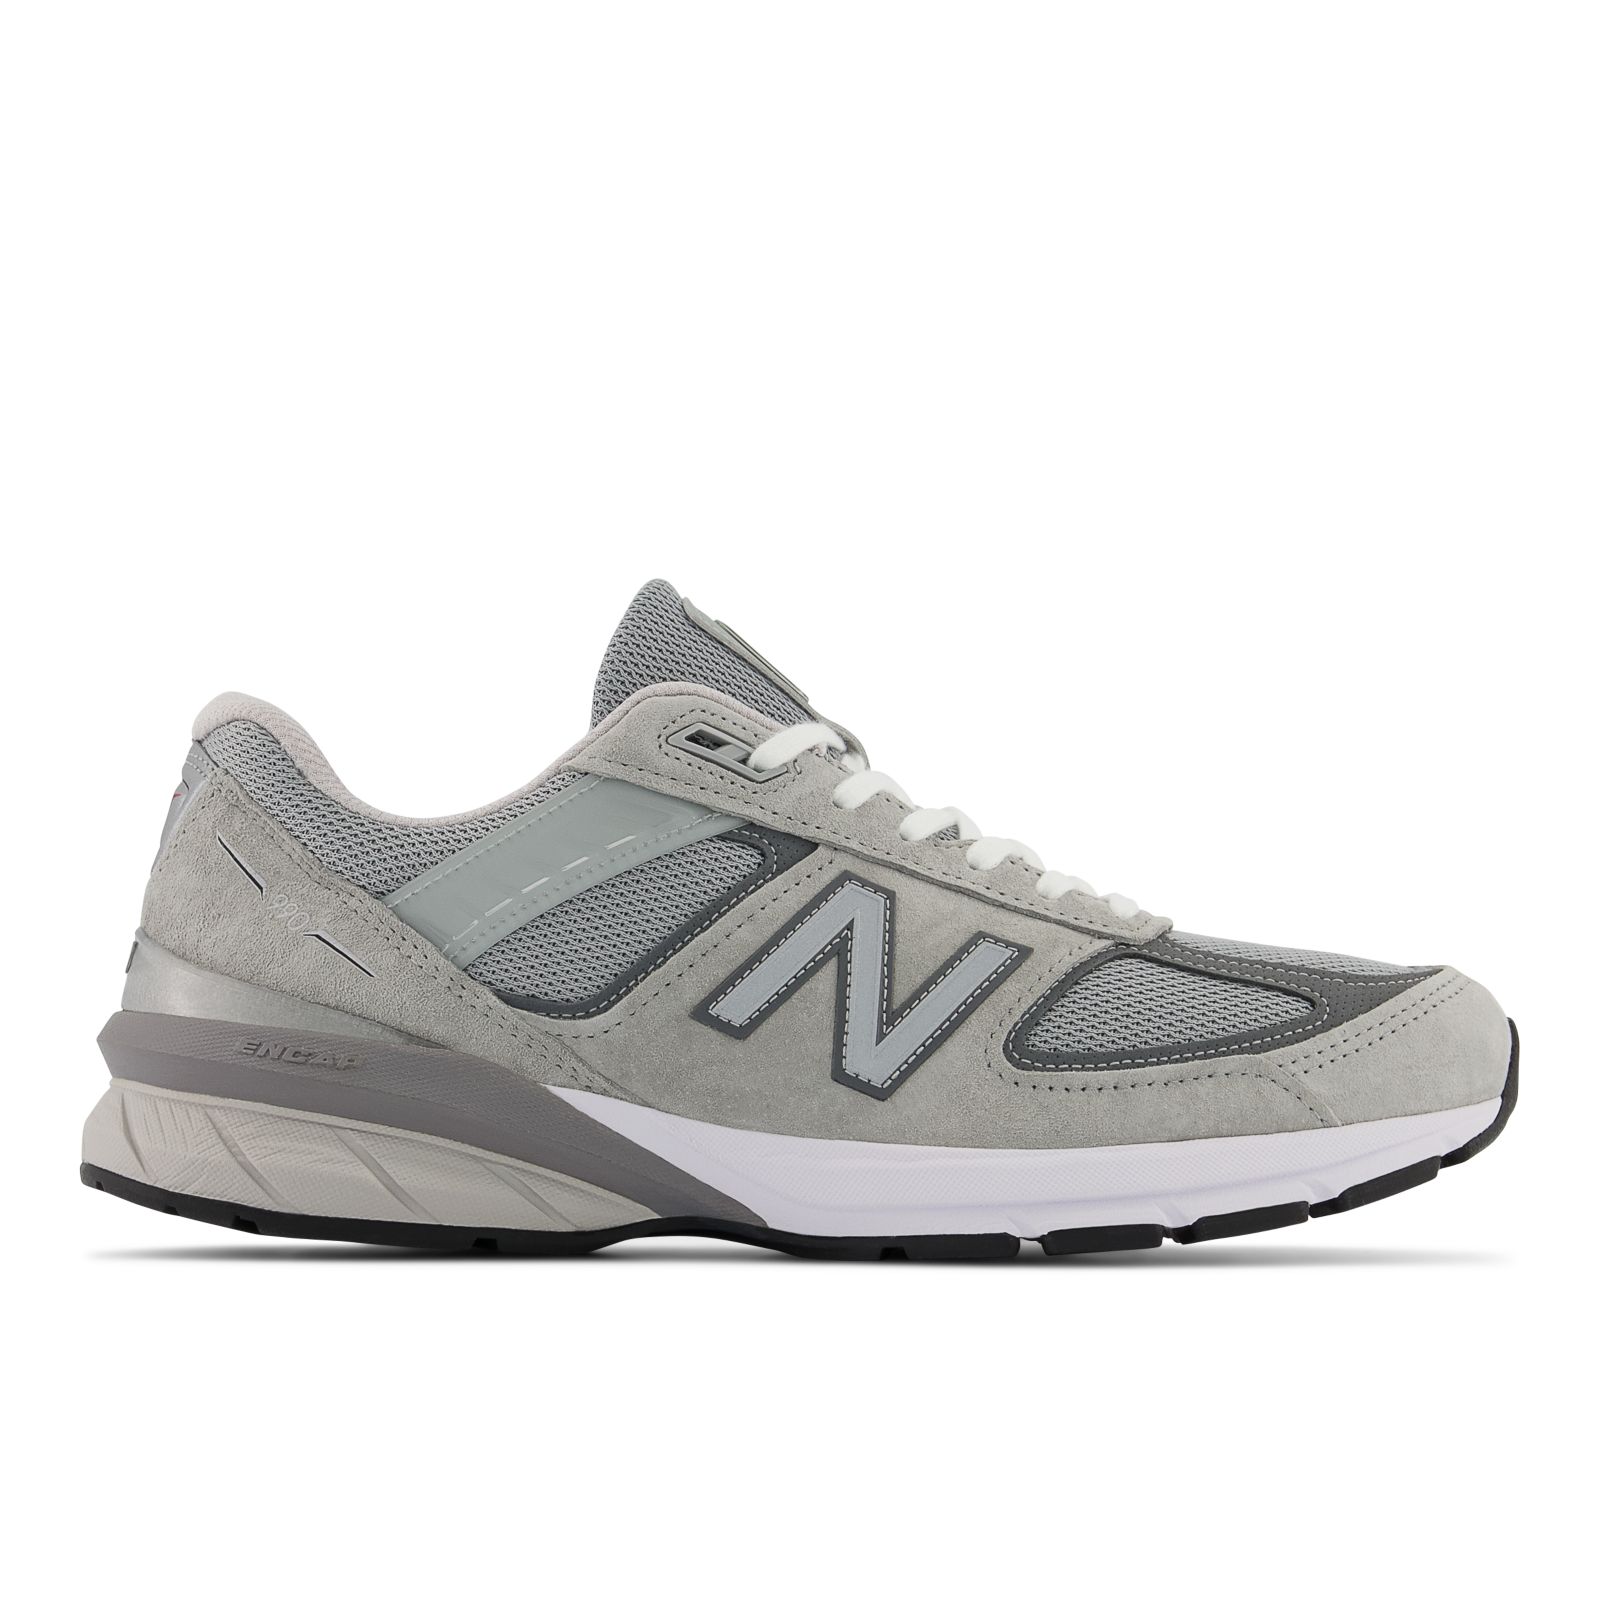 MADE 990v5 Core - New